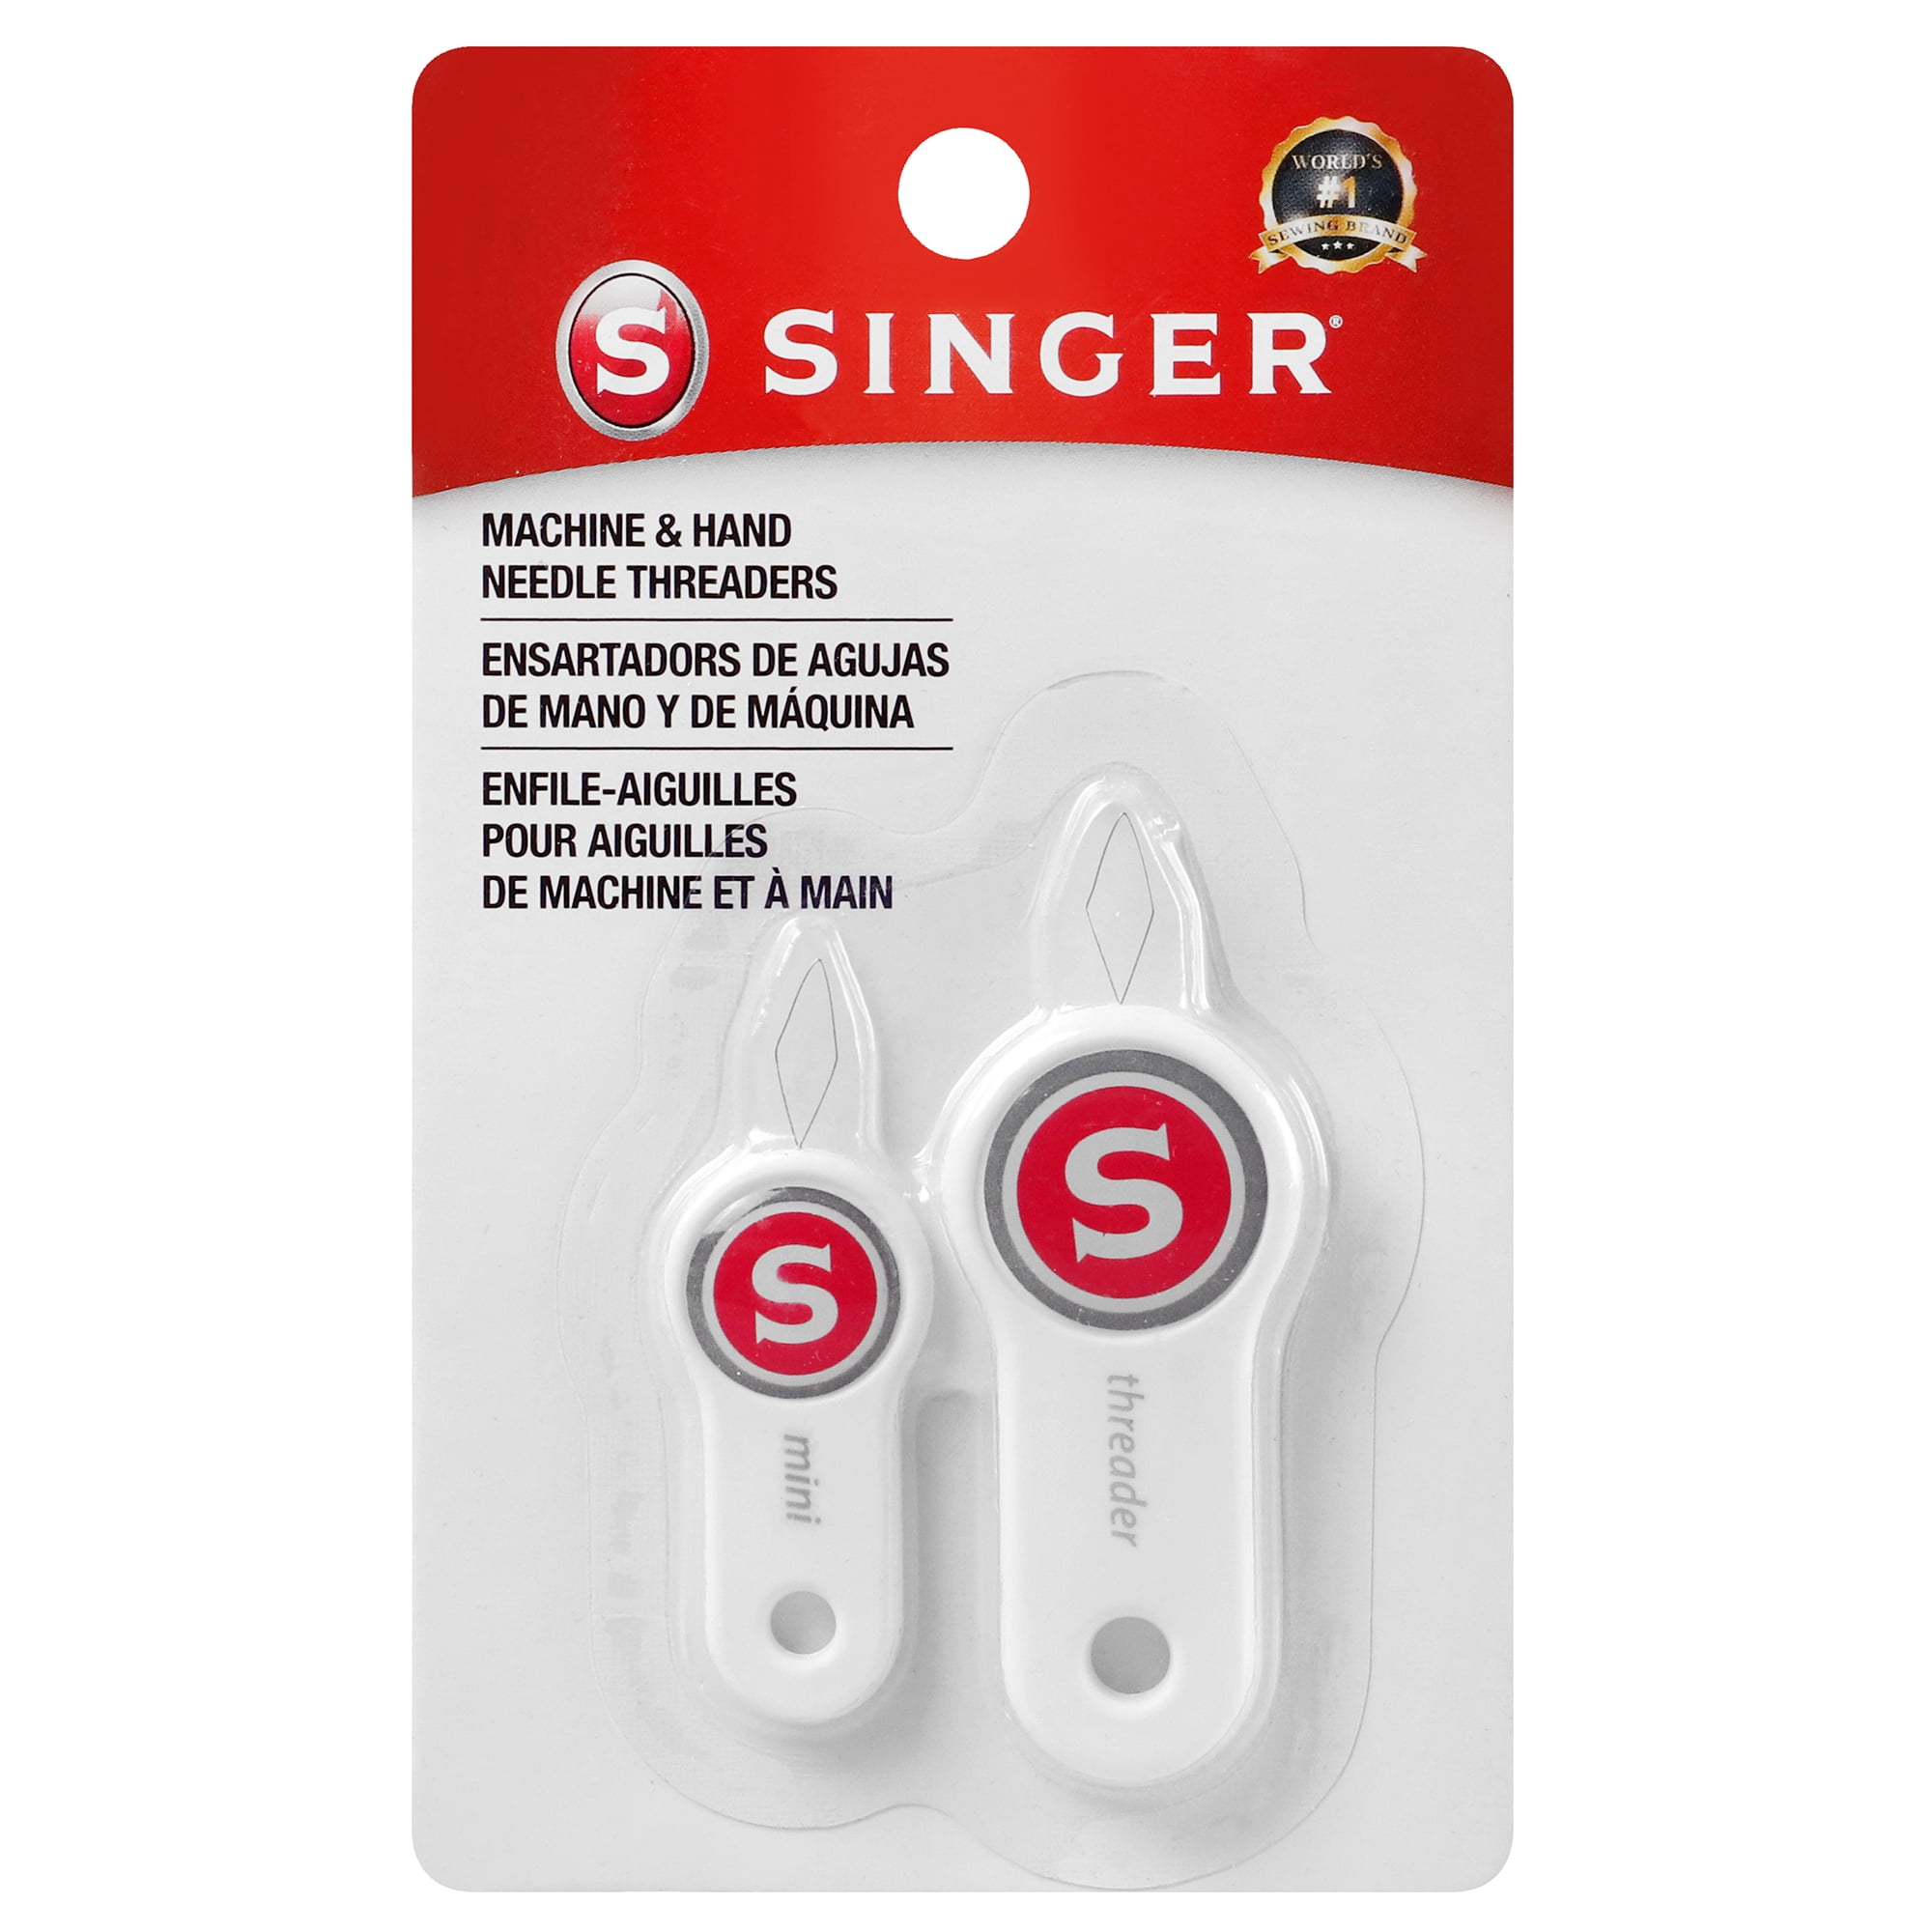 Singer Other Items in Electronics